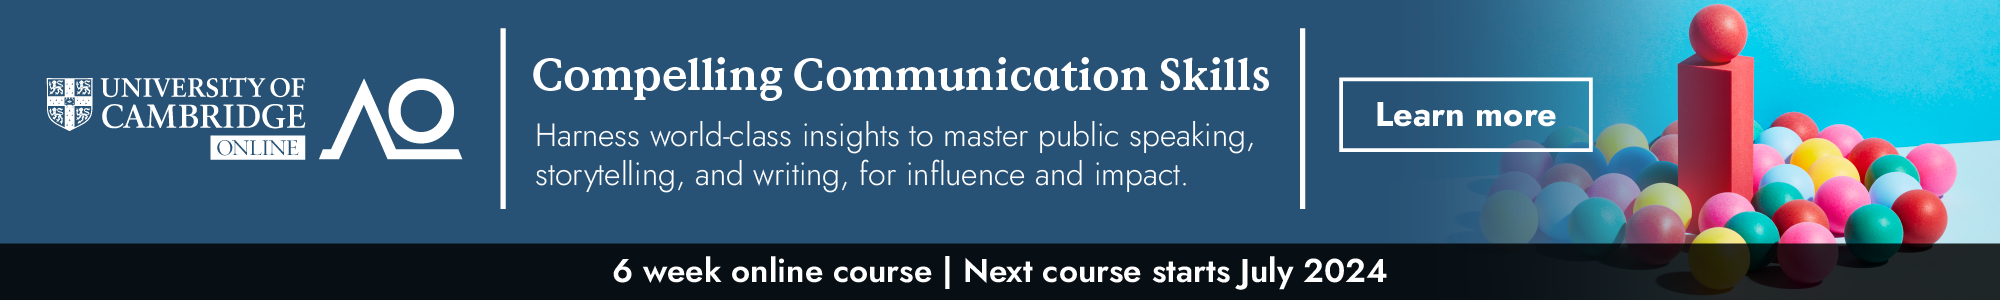 Compelling Communication Skills. Harness world-class insights to master public speaking, storytelling, and writing, for influence and impact. 6 week online course. Next course starts July 2024. Learn more.